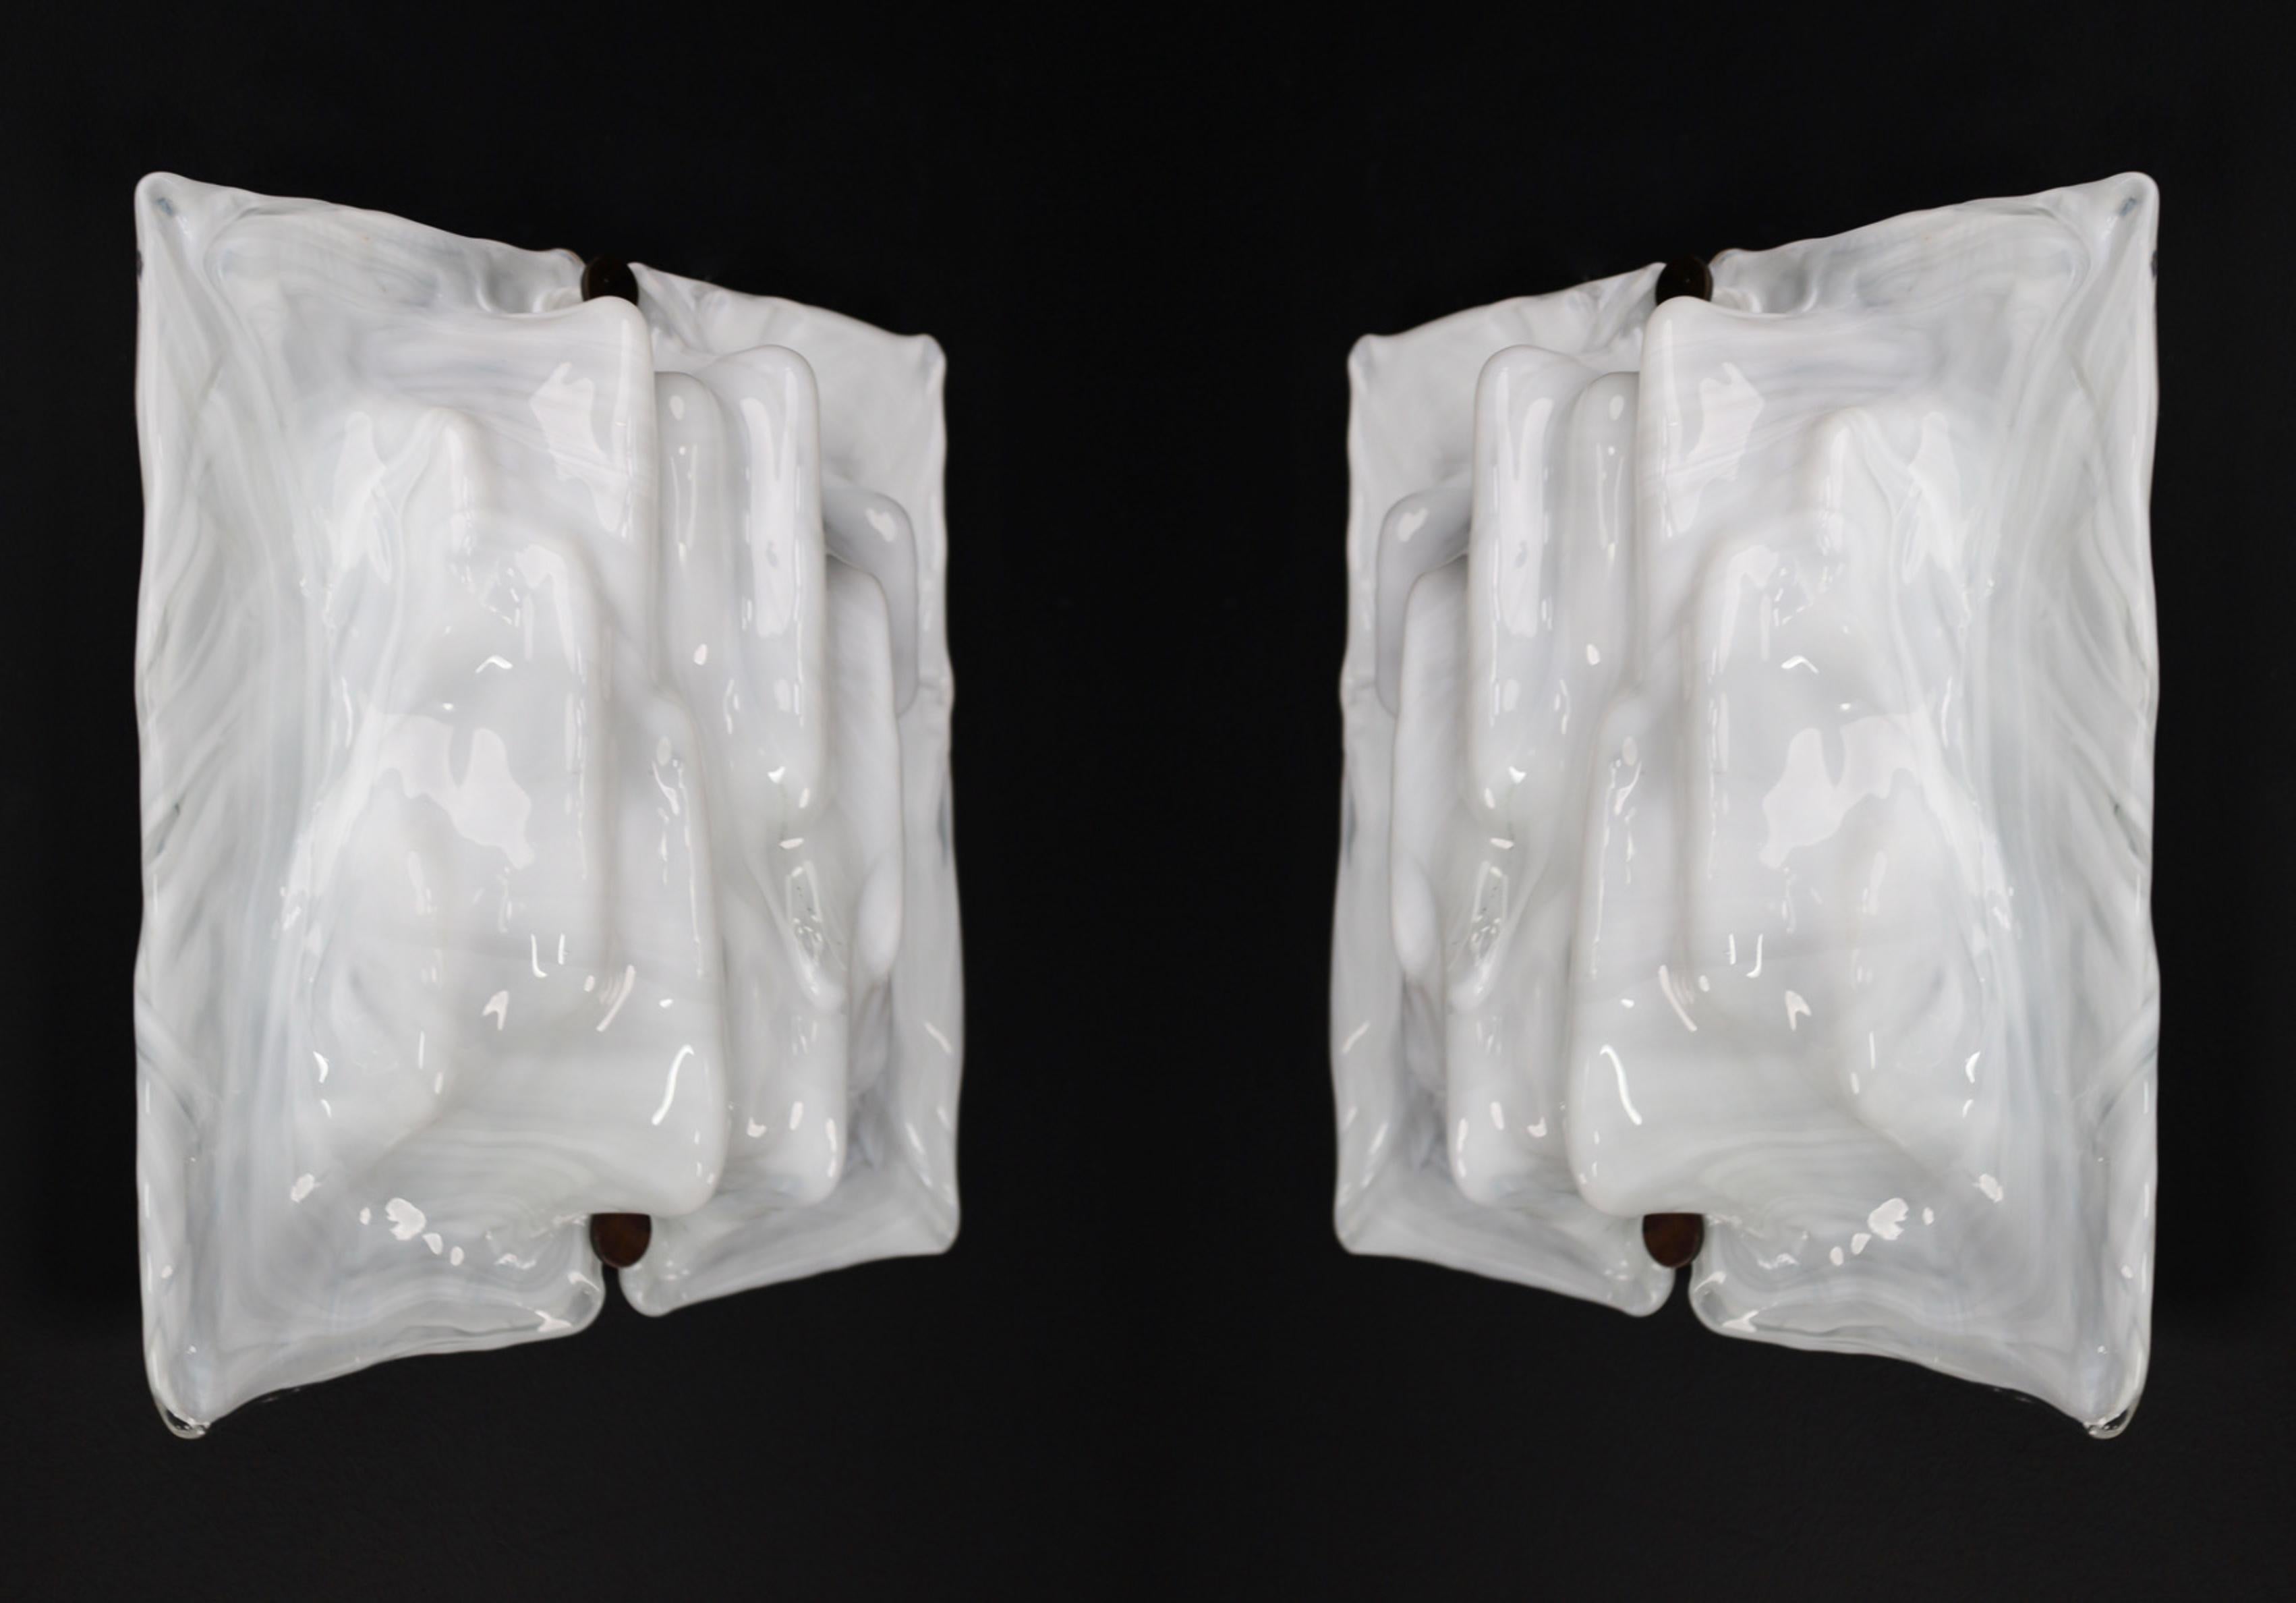 Toni Zuccheri for Venini Murano Glass Sconses, Italy 1970s

Excellent and square Venini white Murano glass applique by Toni Zuccheri made and designed in Italy 1970s. These wall sconces are executed to a very high standard. The Murano glass